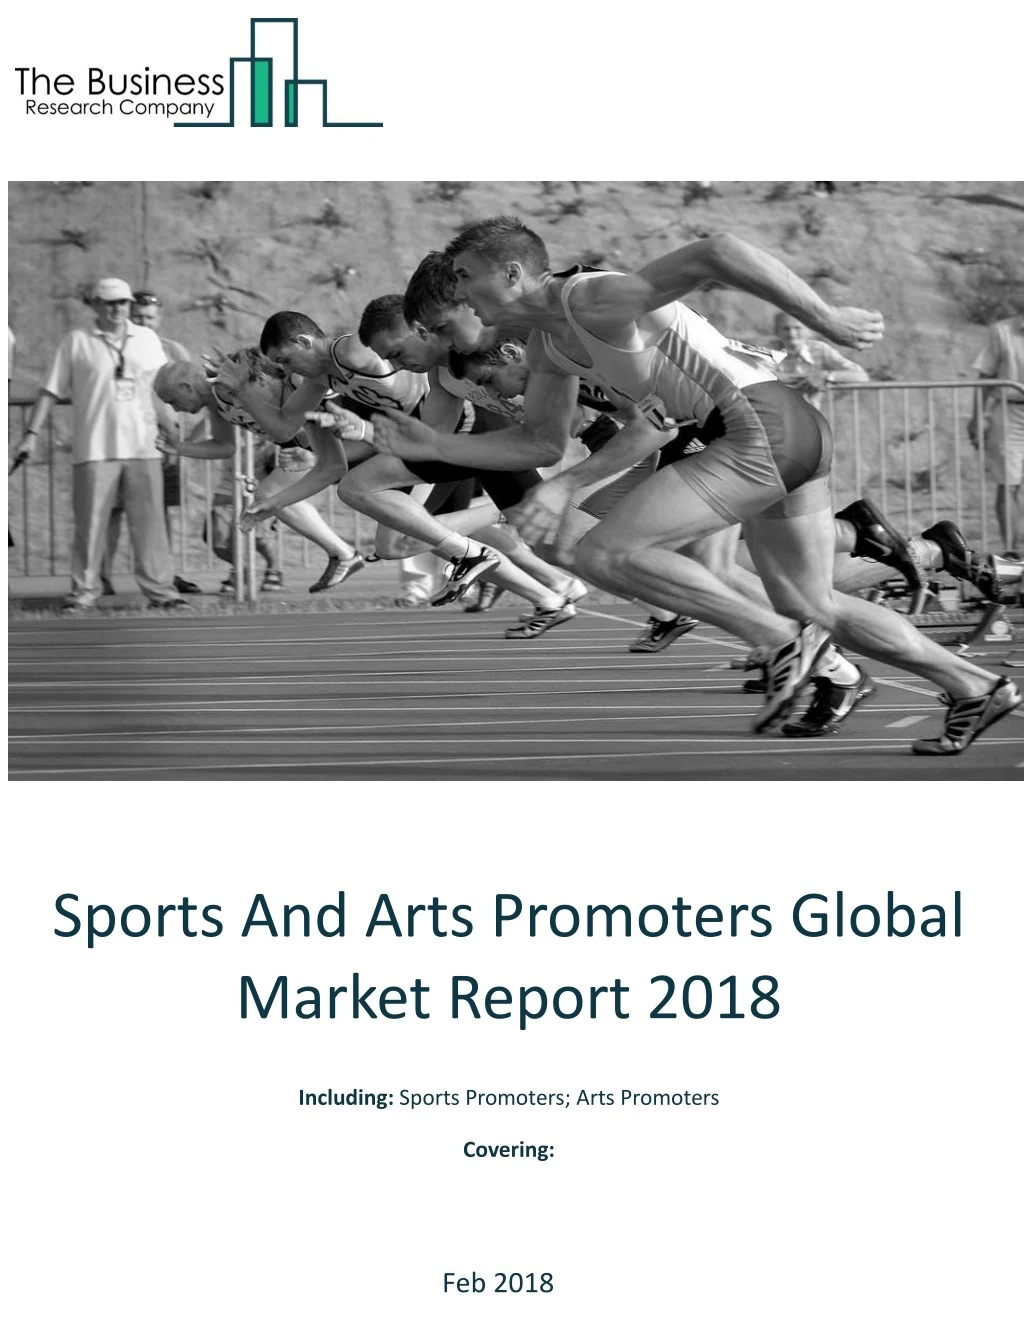 sports and arts promoters global market report